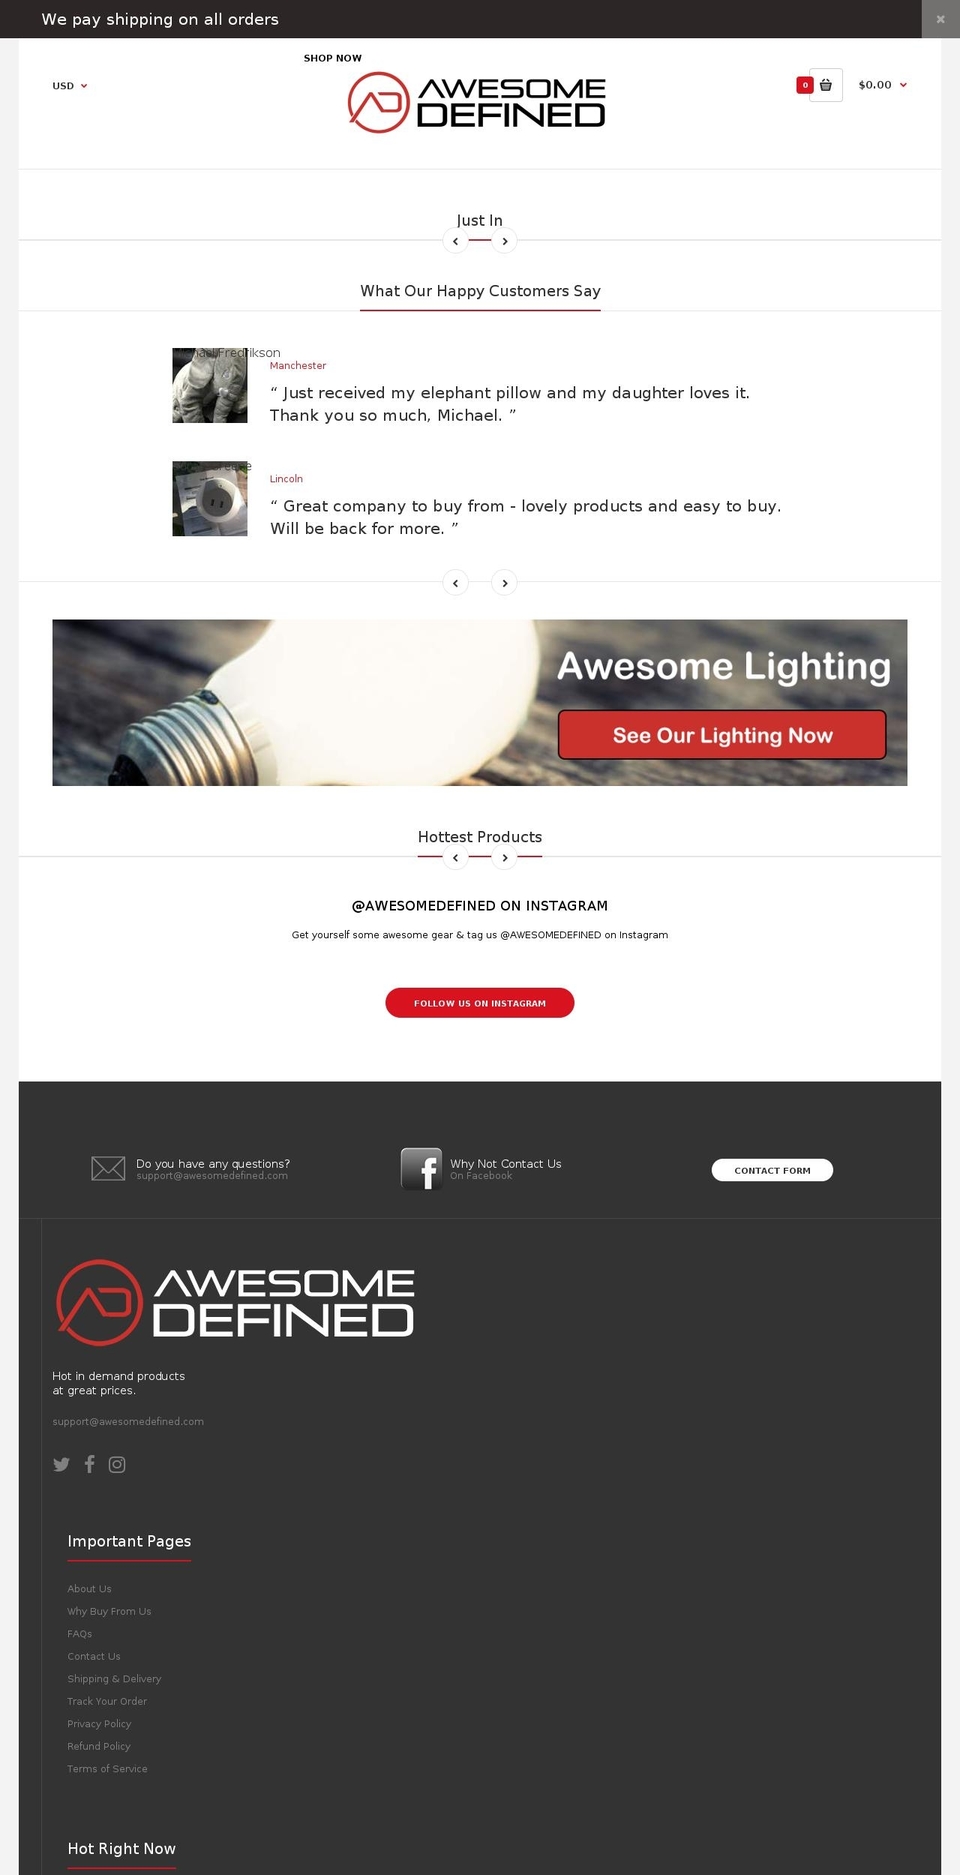 FASTOR Shopify theme site example awesomedefined.com